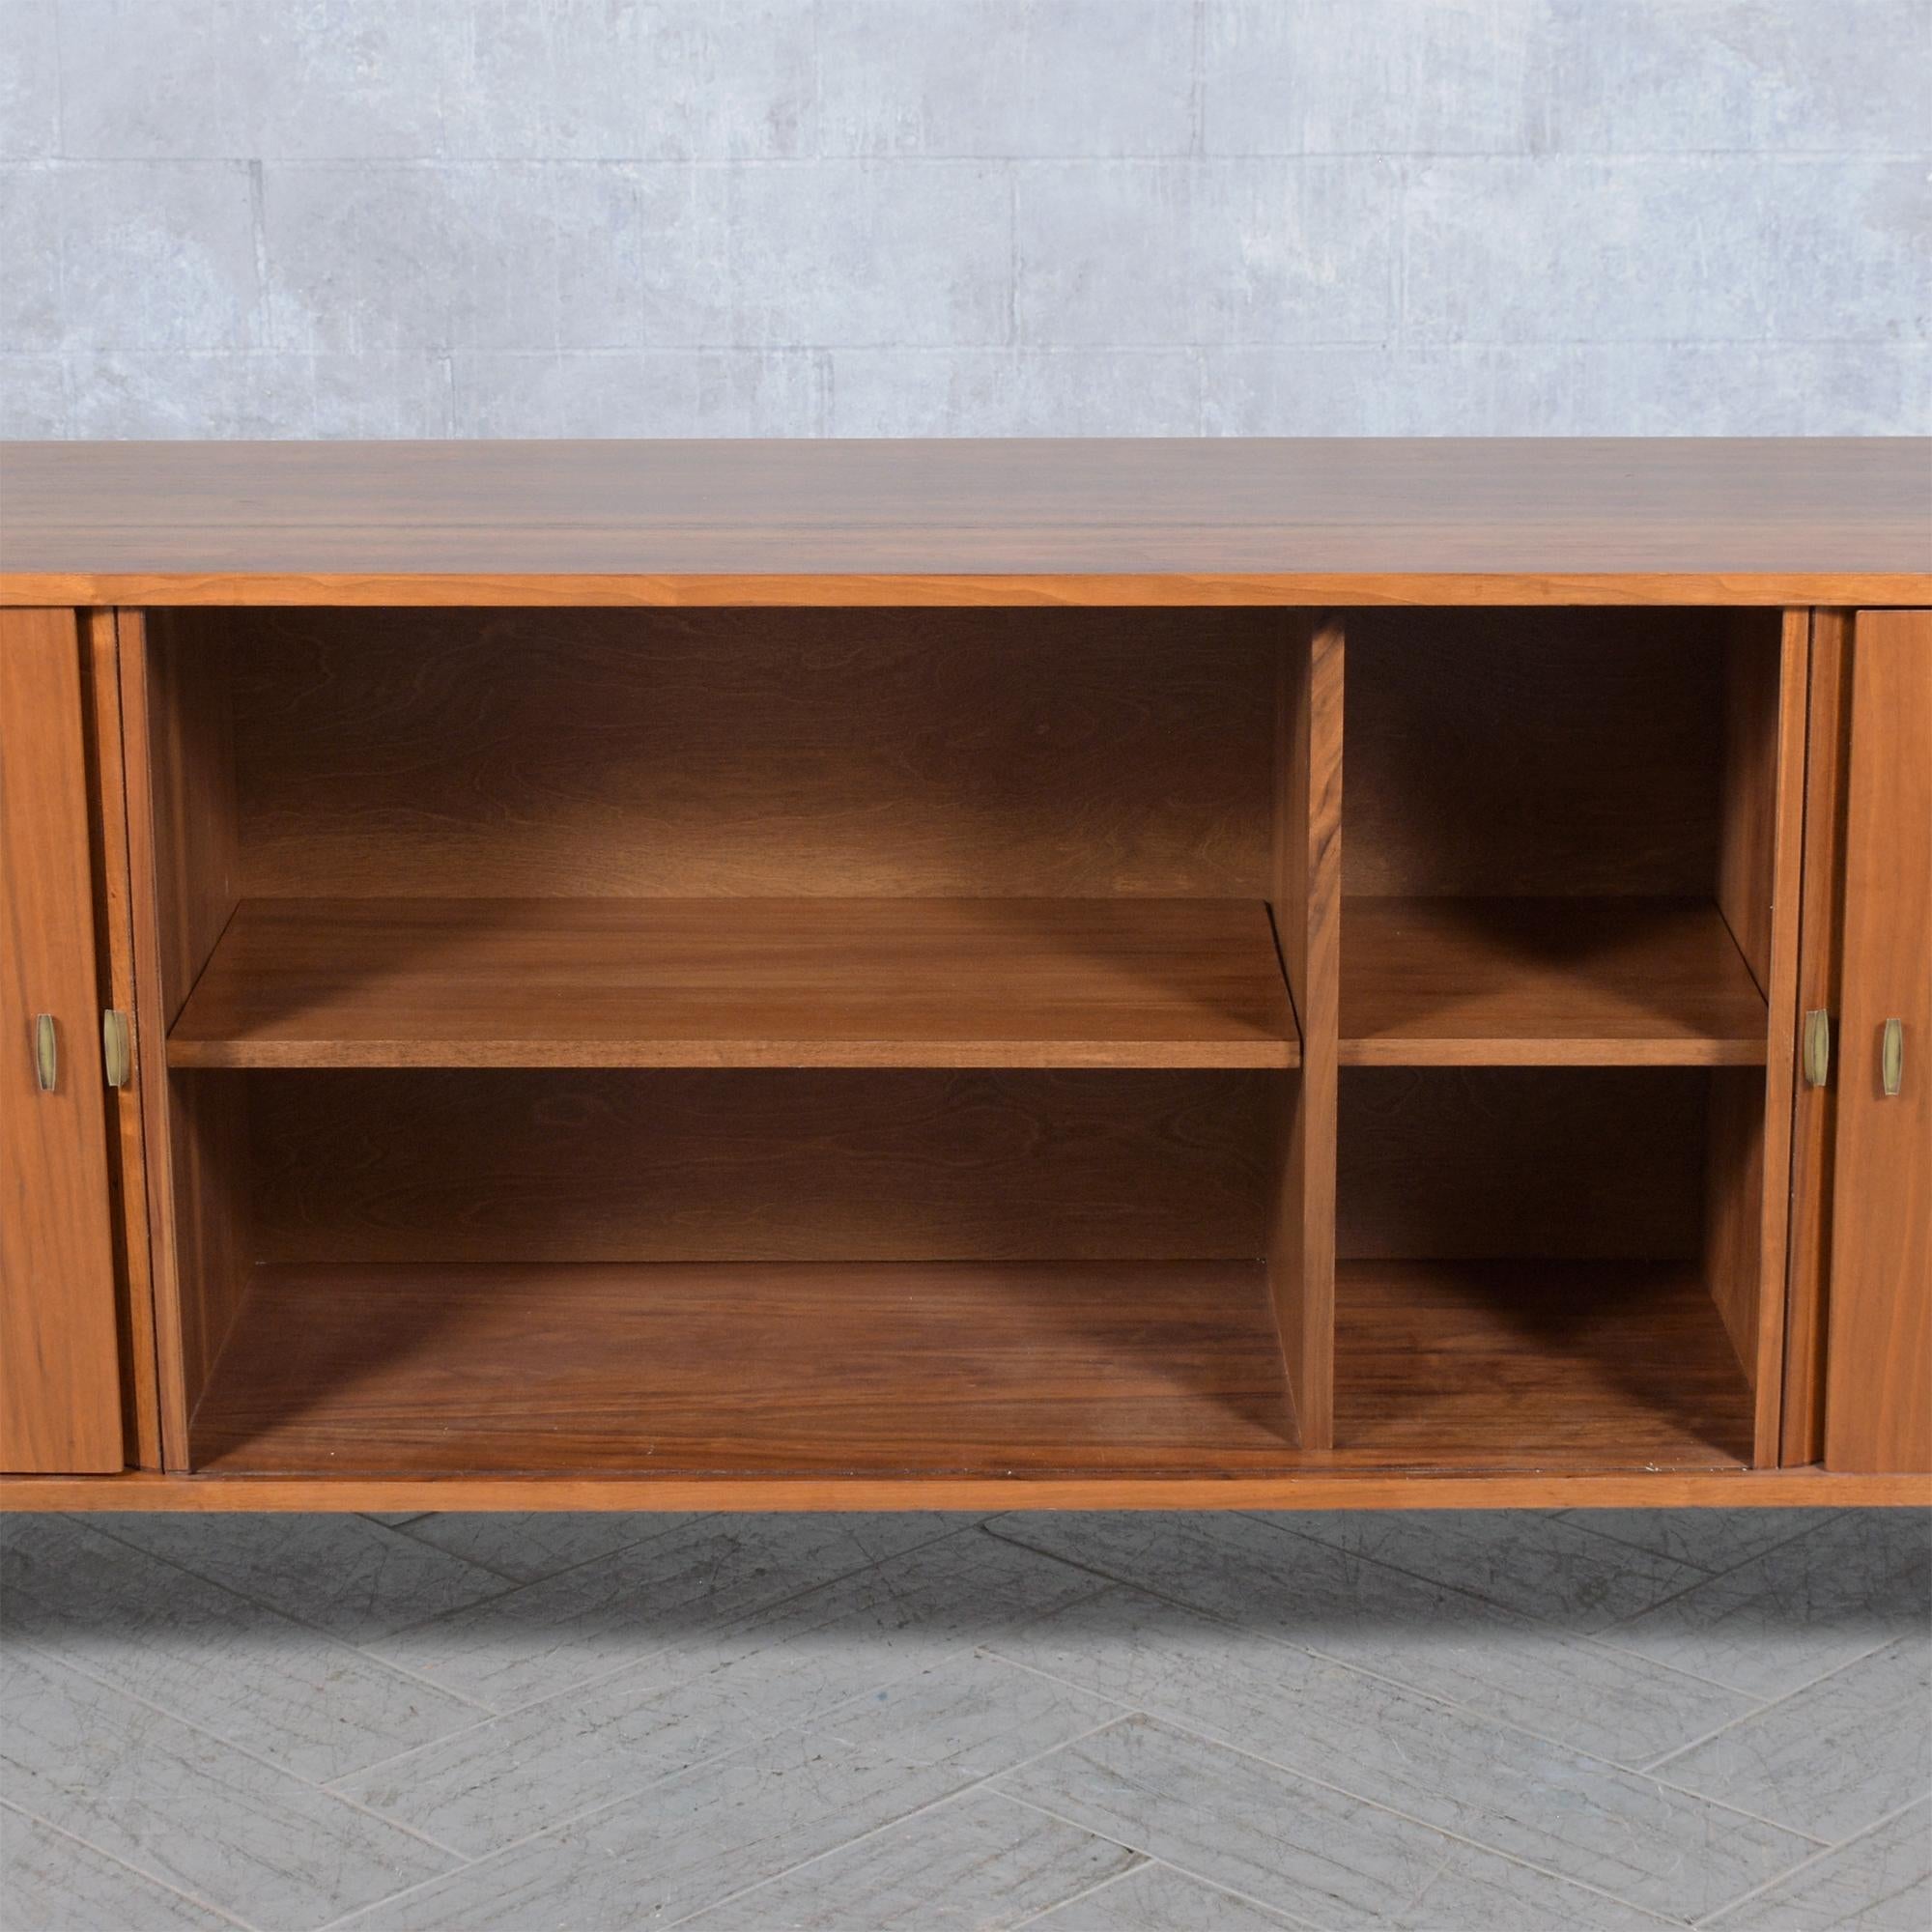 1960s Mid-Century Modern Walnut Credenza with Tambour Doors and Storage For Sale 2